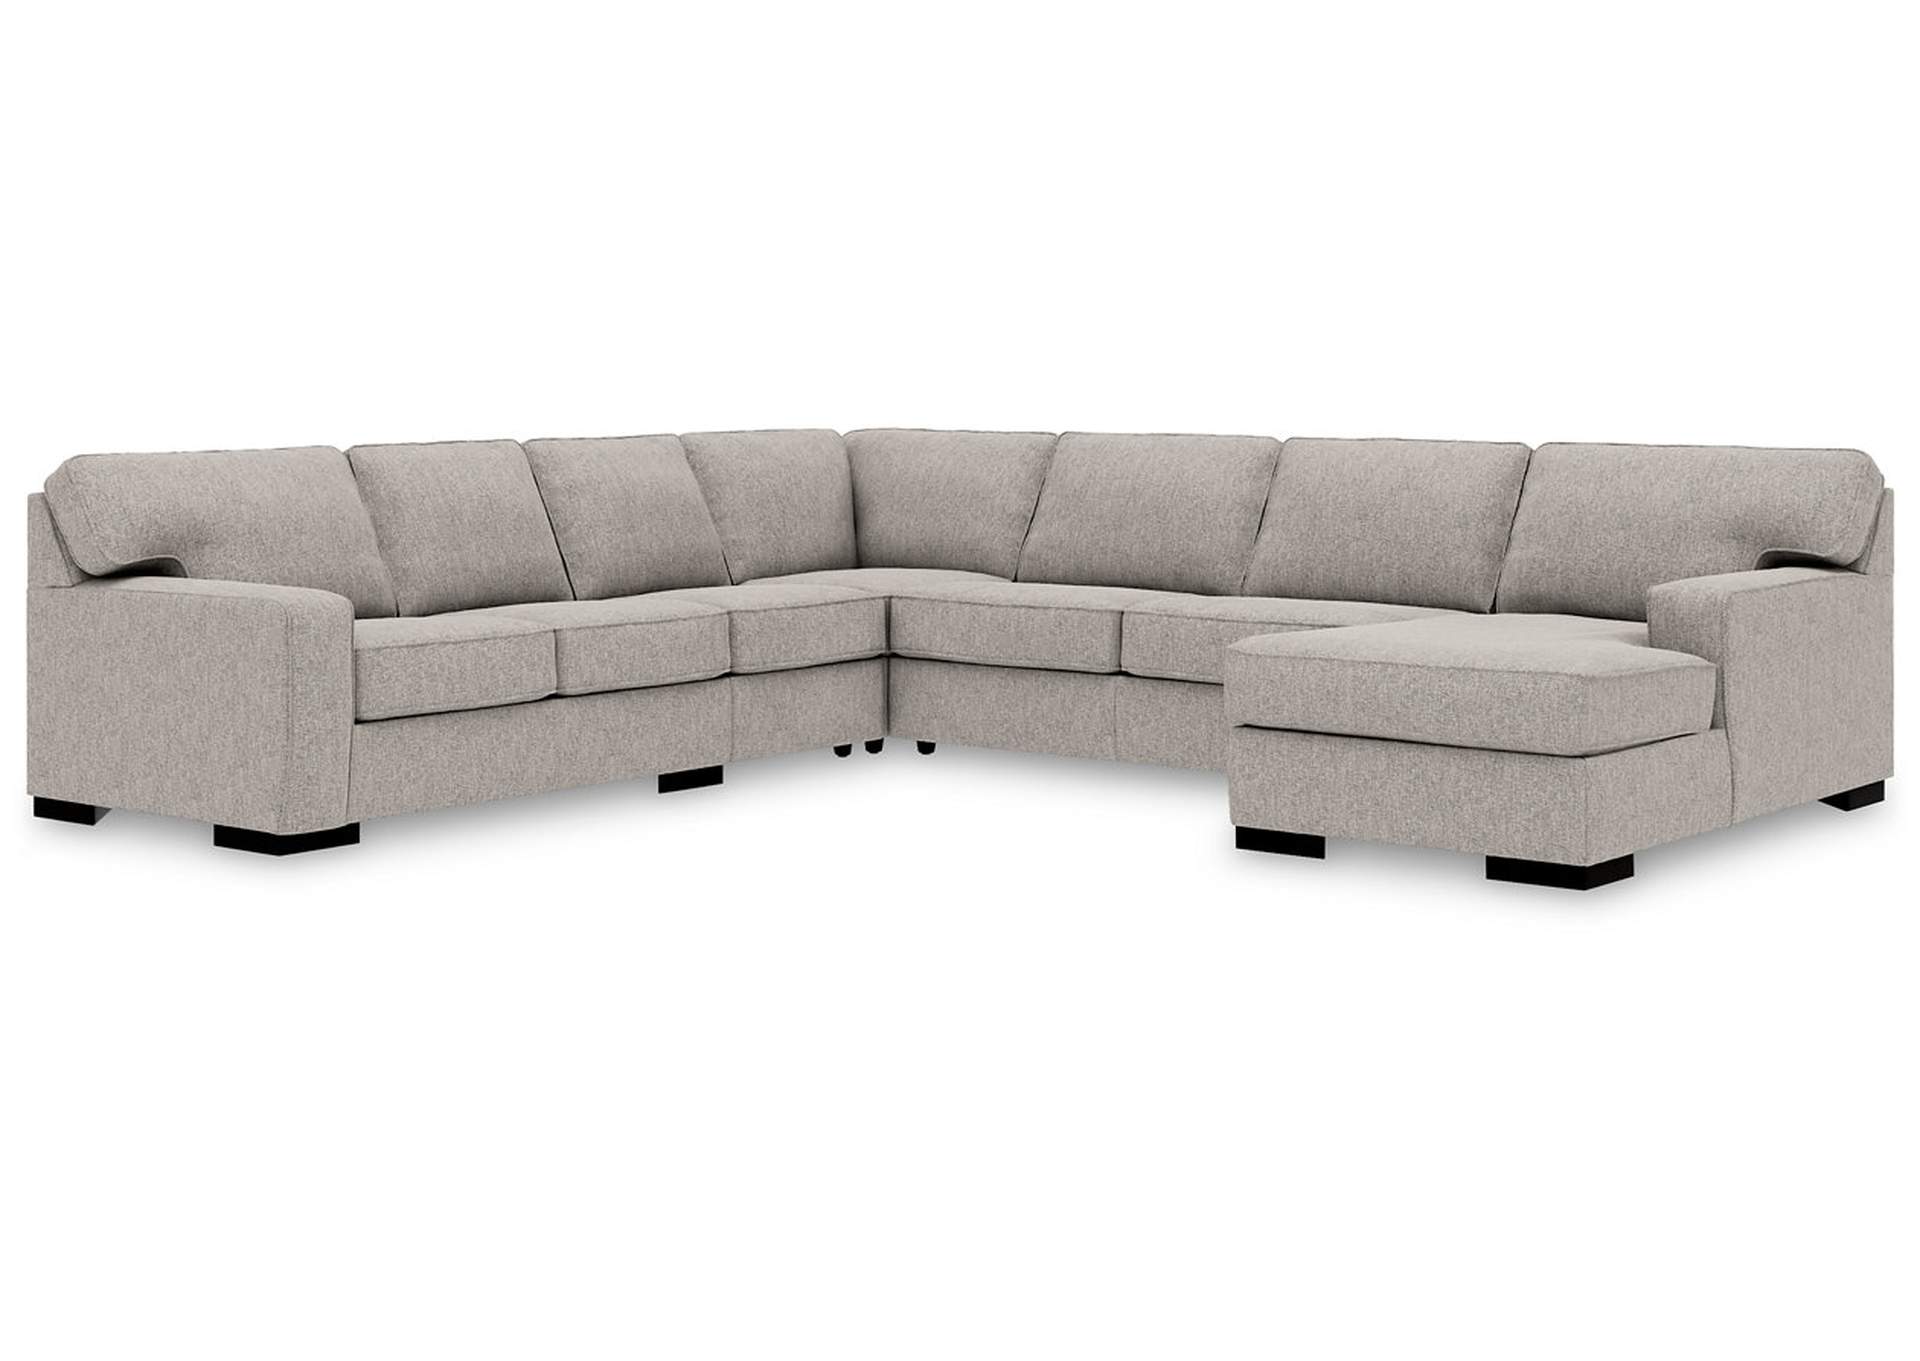 Ashlor Nuvella® 5-Piece Sleeper Sectional with Chaise,Ashley